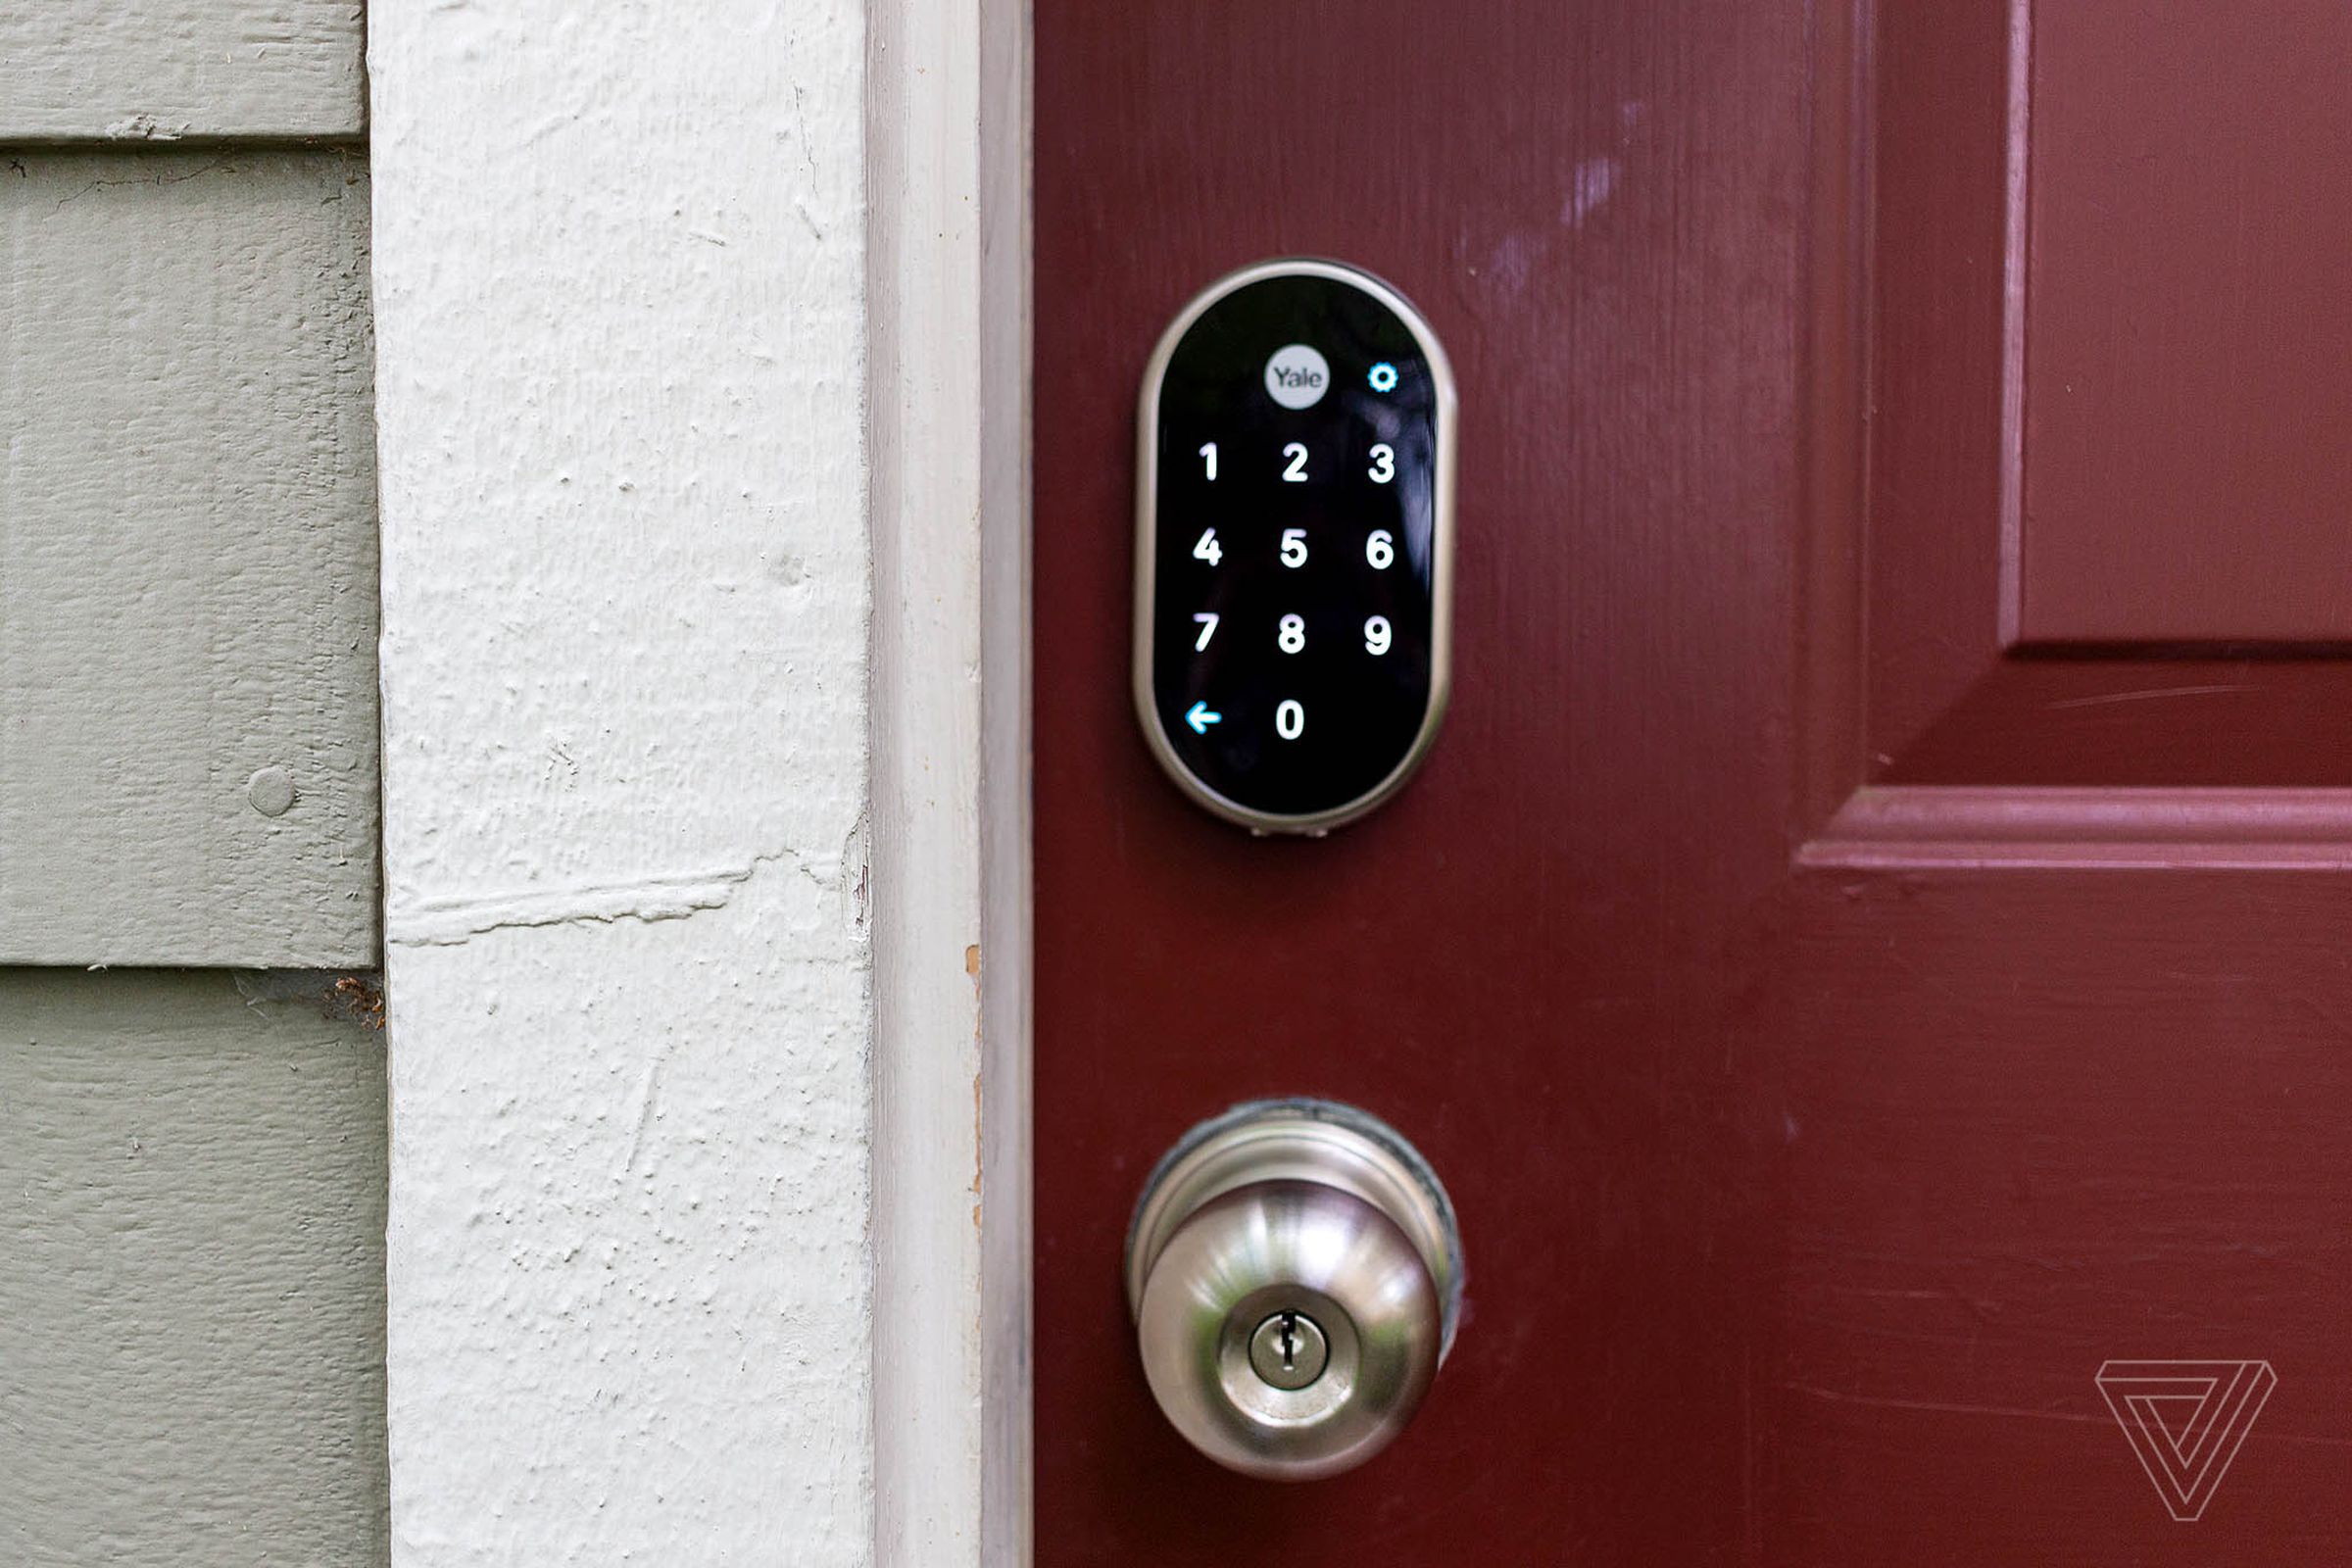 The Nest x Yale smart lock that was introduced in 2018.